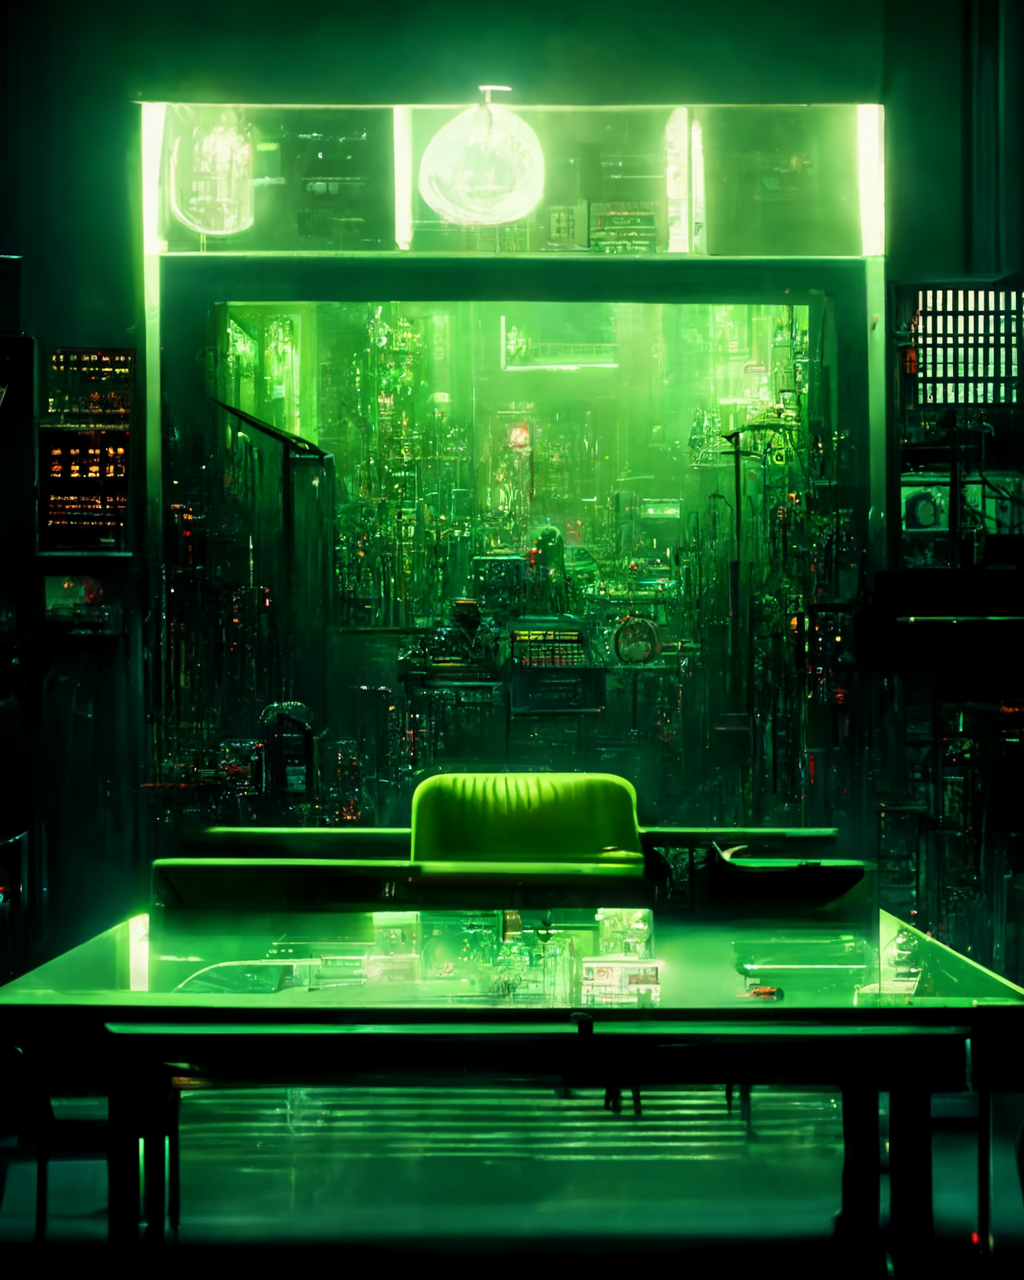 prompthunt: detailed cyberpunk objects on the table, matrix movie, bright green lighting, close up